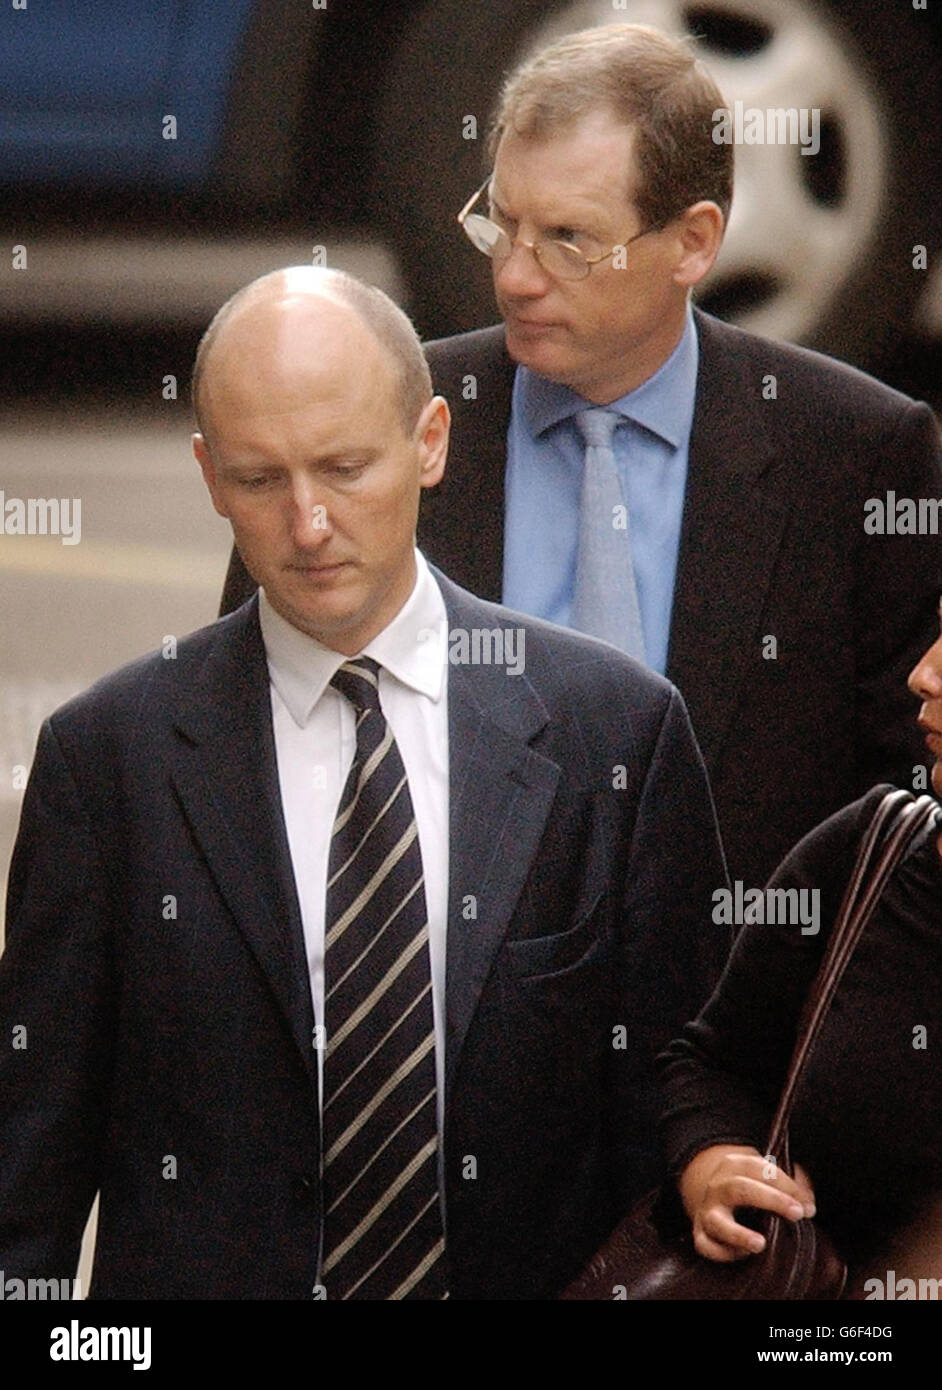 Tom Kelly and Godric Smith (front), the two official spokesmen for British Prime Minister Tony Blair, arrive to give evidence to the Hutton inquiry at the High Court in London. * The inquiry is investigating how weapons expert Dr David Kelly apparently came to take his own life after being identified as the source of the report by BBC journalist Andrew Gilligan on May 29. Stock Photo